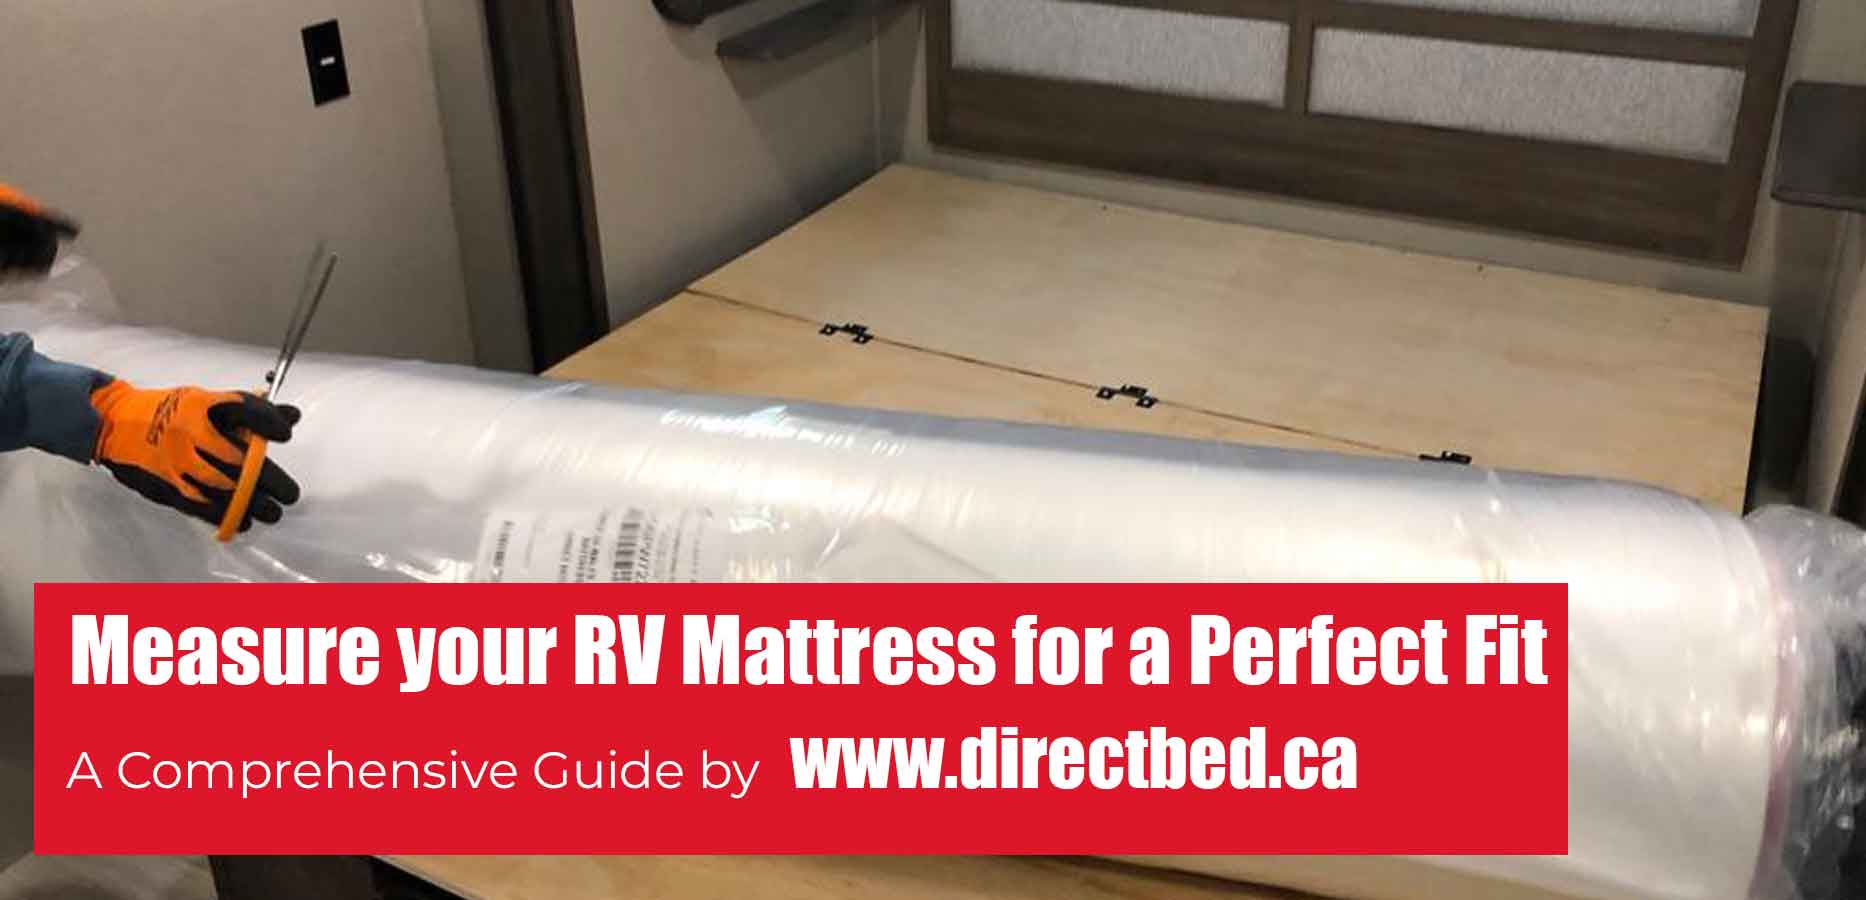 How to measure your RV Mattress size for a perfect fit